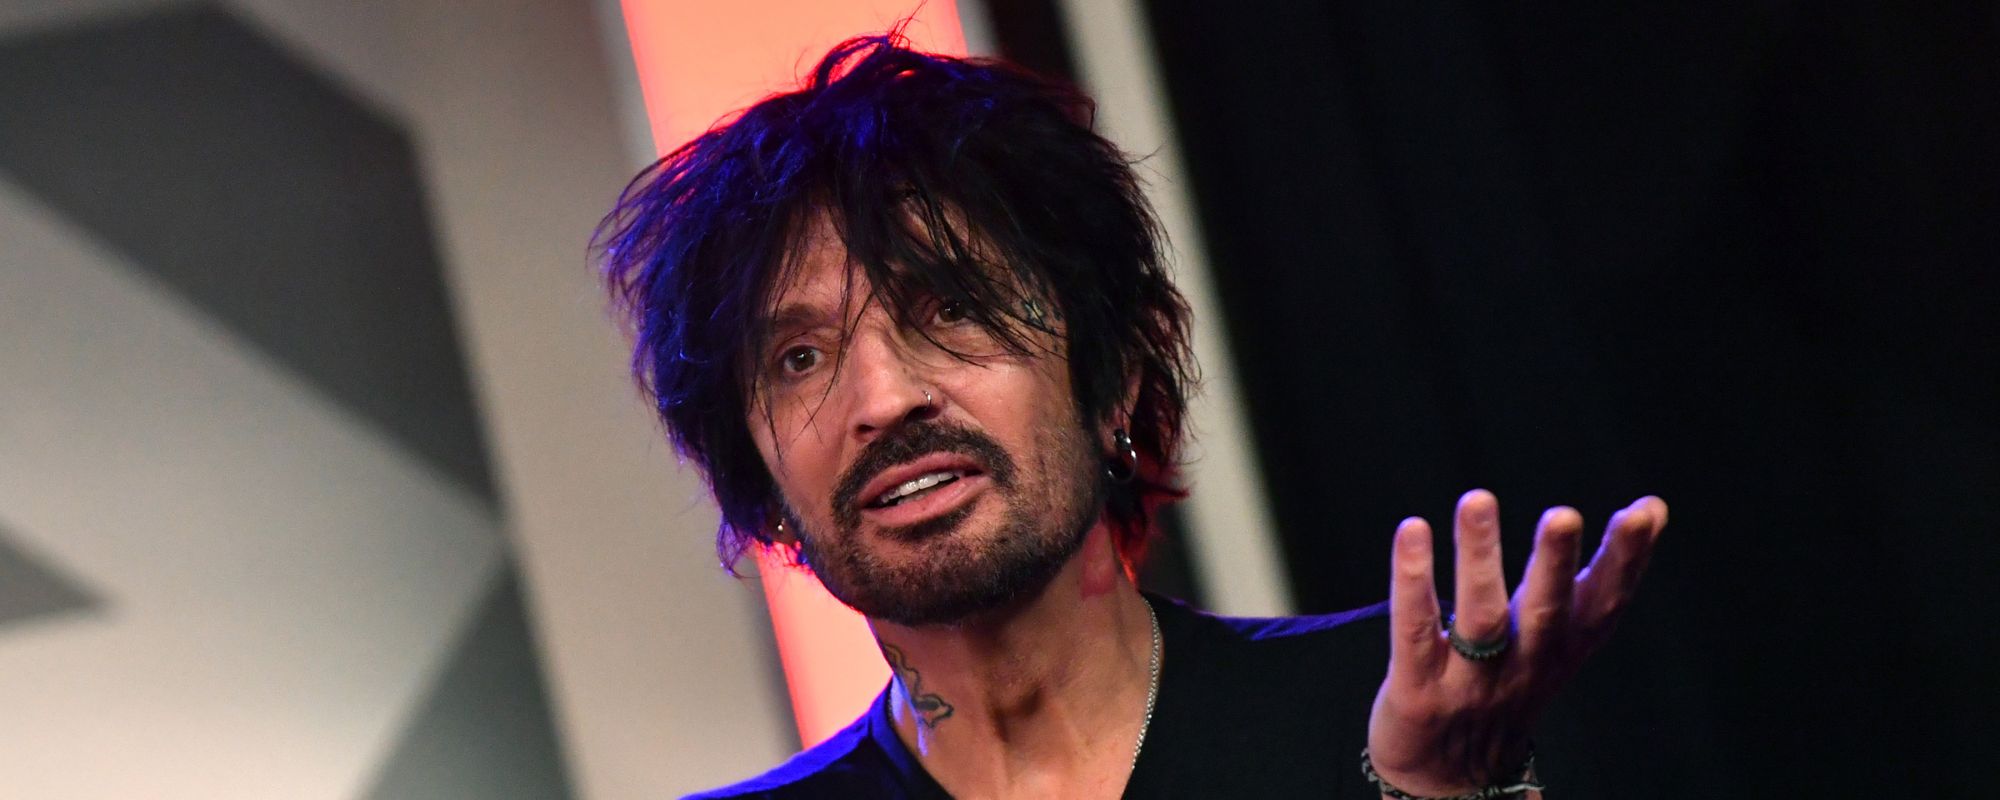 Tommy Lee Talks “Rebirth” of Mötley Crüe and Their New Energy With John 5